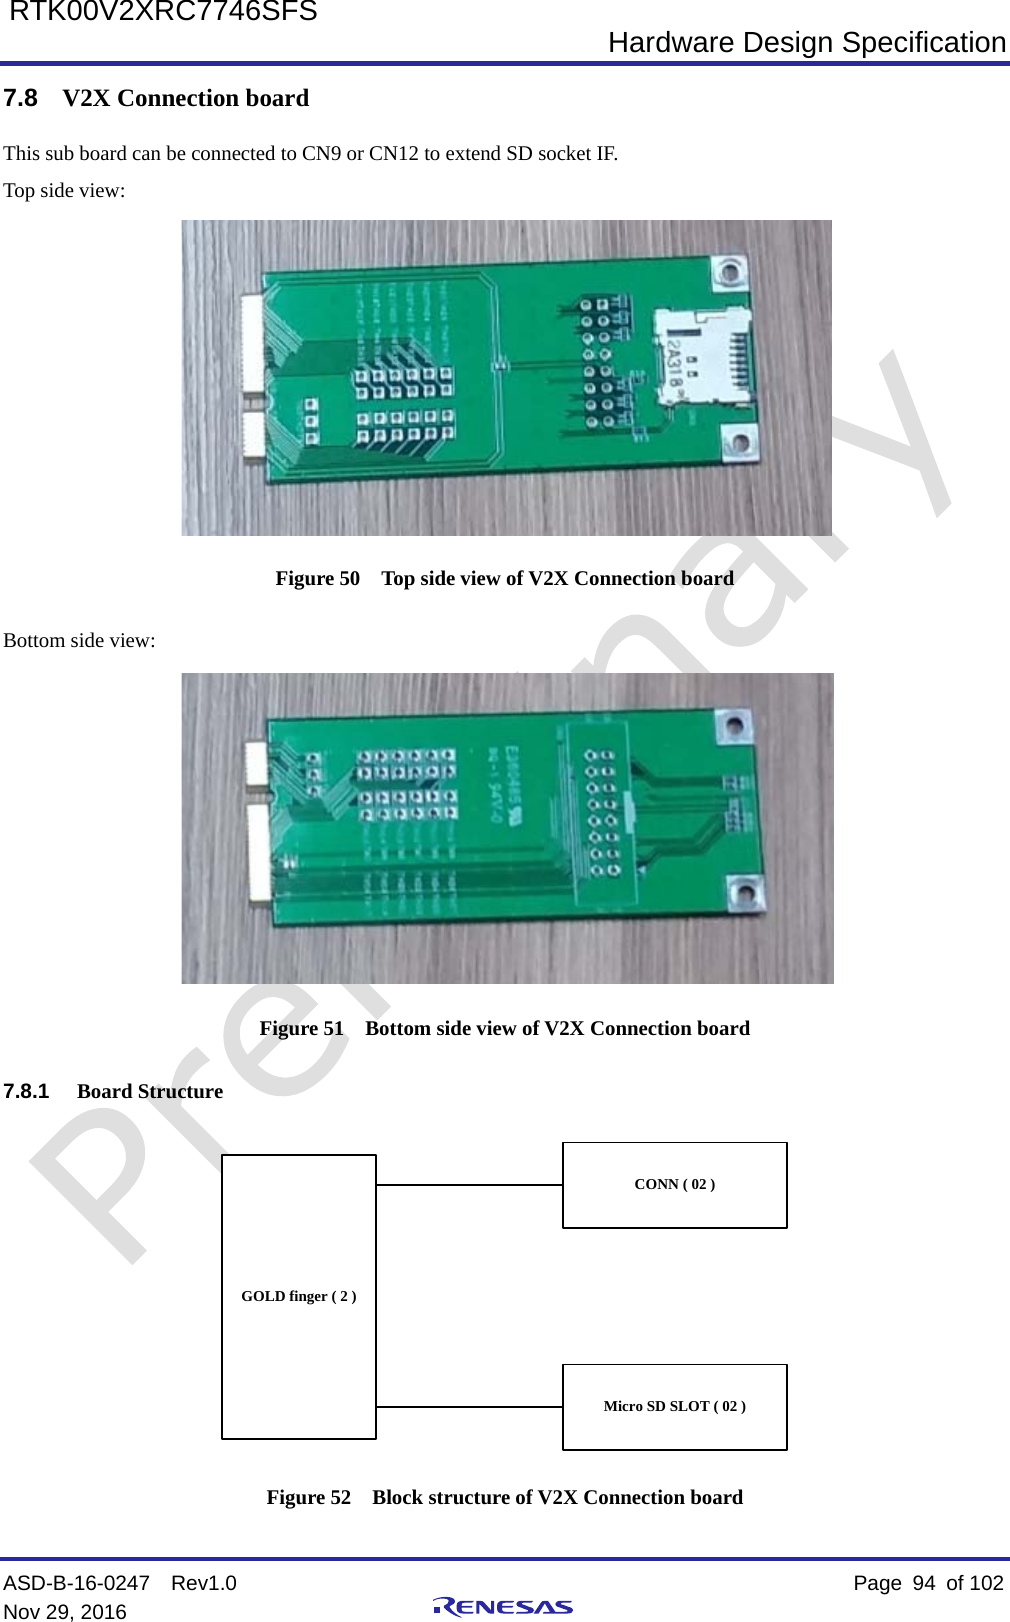  Hardware Design Specification ASD-B-16-0247  Rev1.0    Page  94 of 102 Nov 29, 2016     RTK00V2XRC7746SFS 7.8 V2X Connection board This sub board can be connected to CN9 or CN12 to extend SD socket IF. Top side view:  Figure 50  Top side view of V2X Connection board Bottom side view:  Figure 51  Bottom side view of V2X Connection board 7.8.1 Board Structure GOLD finger ( 2 )CONN ( 02 )Micro SD SLOT ( 02 ) Figure 52  Block structure of V2X Connection board 